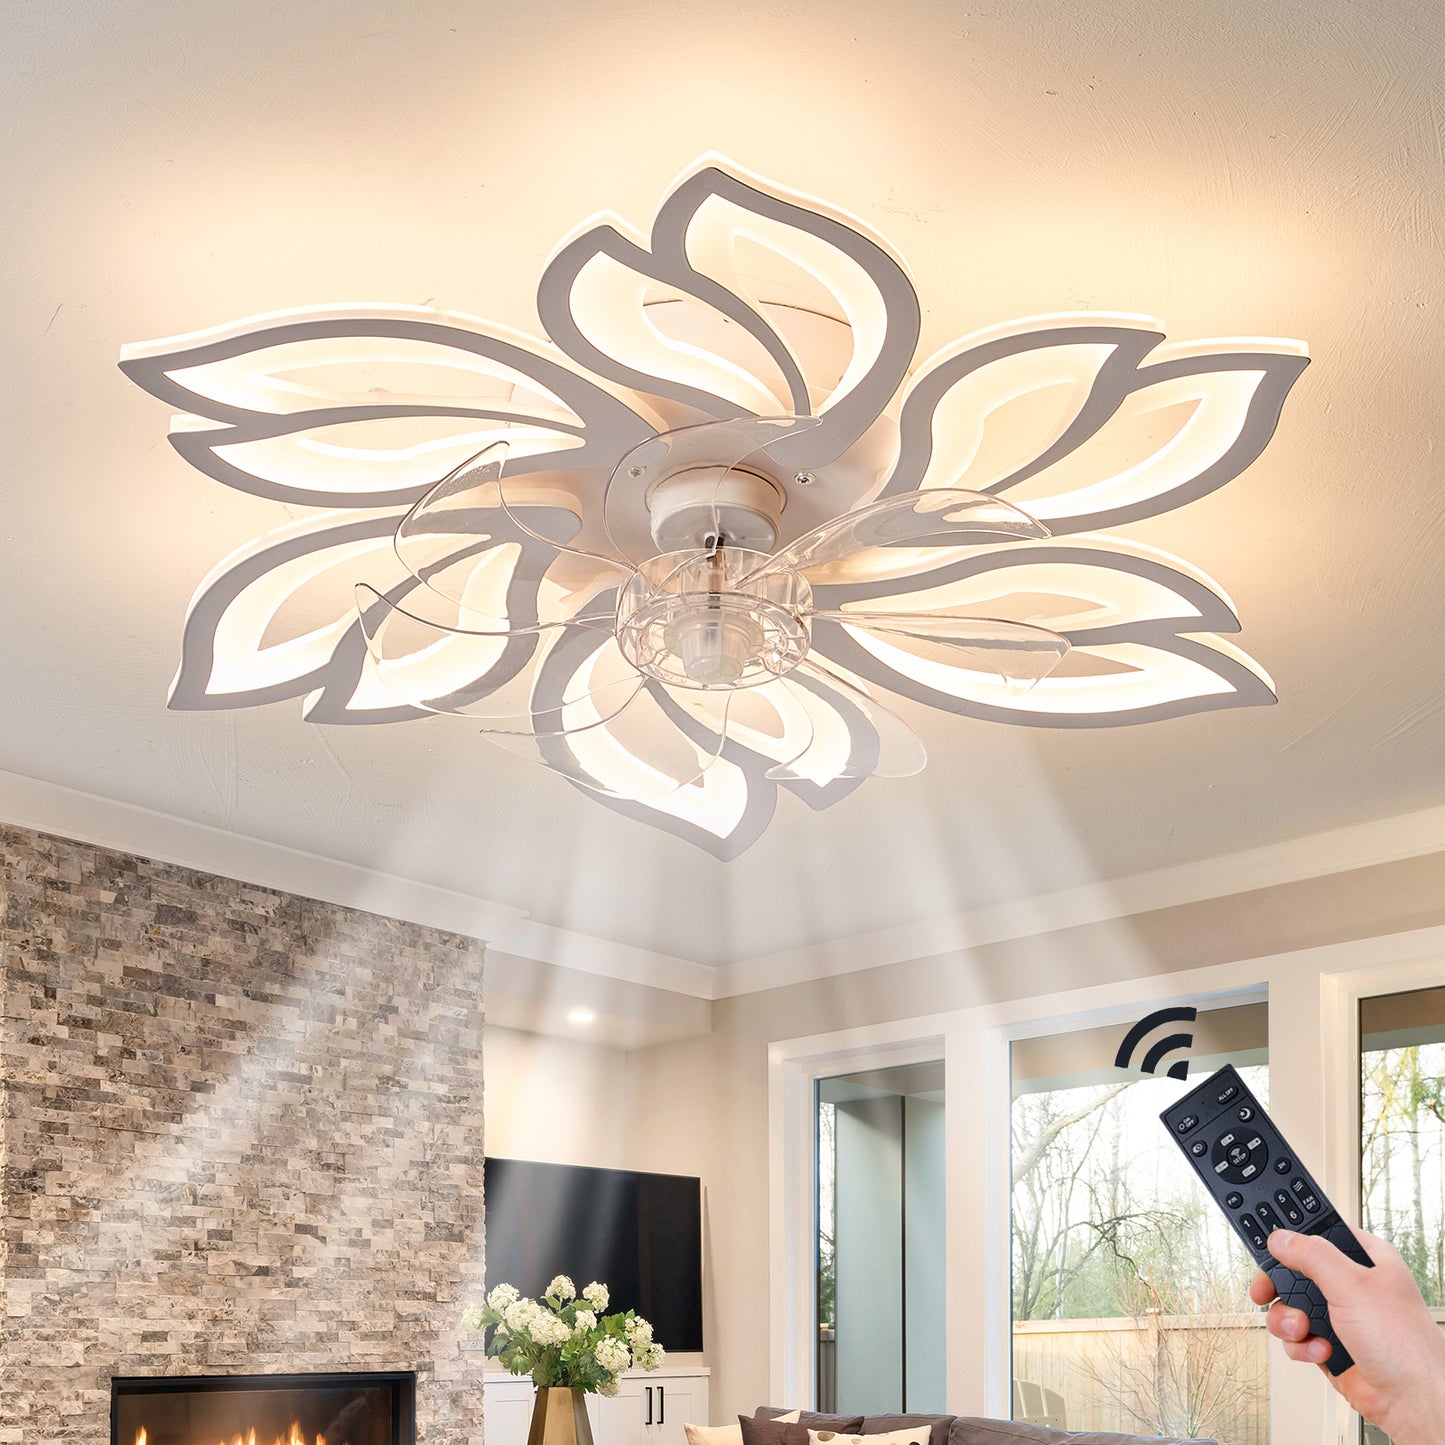 26 Smart Ceiling Fan with Dimmable LED Lights and Remote Control